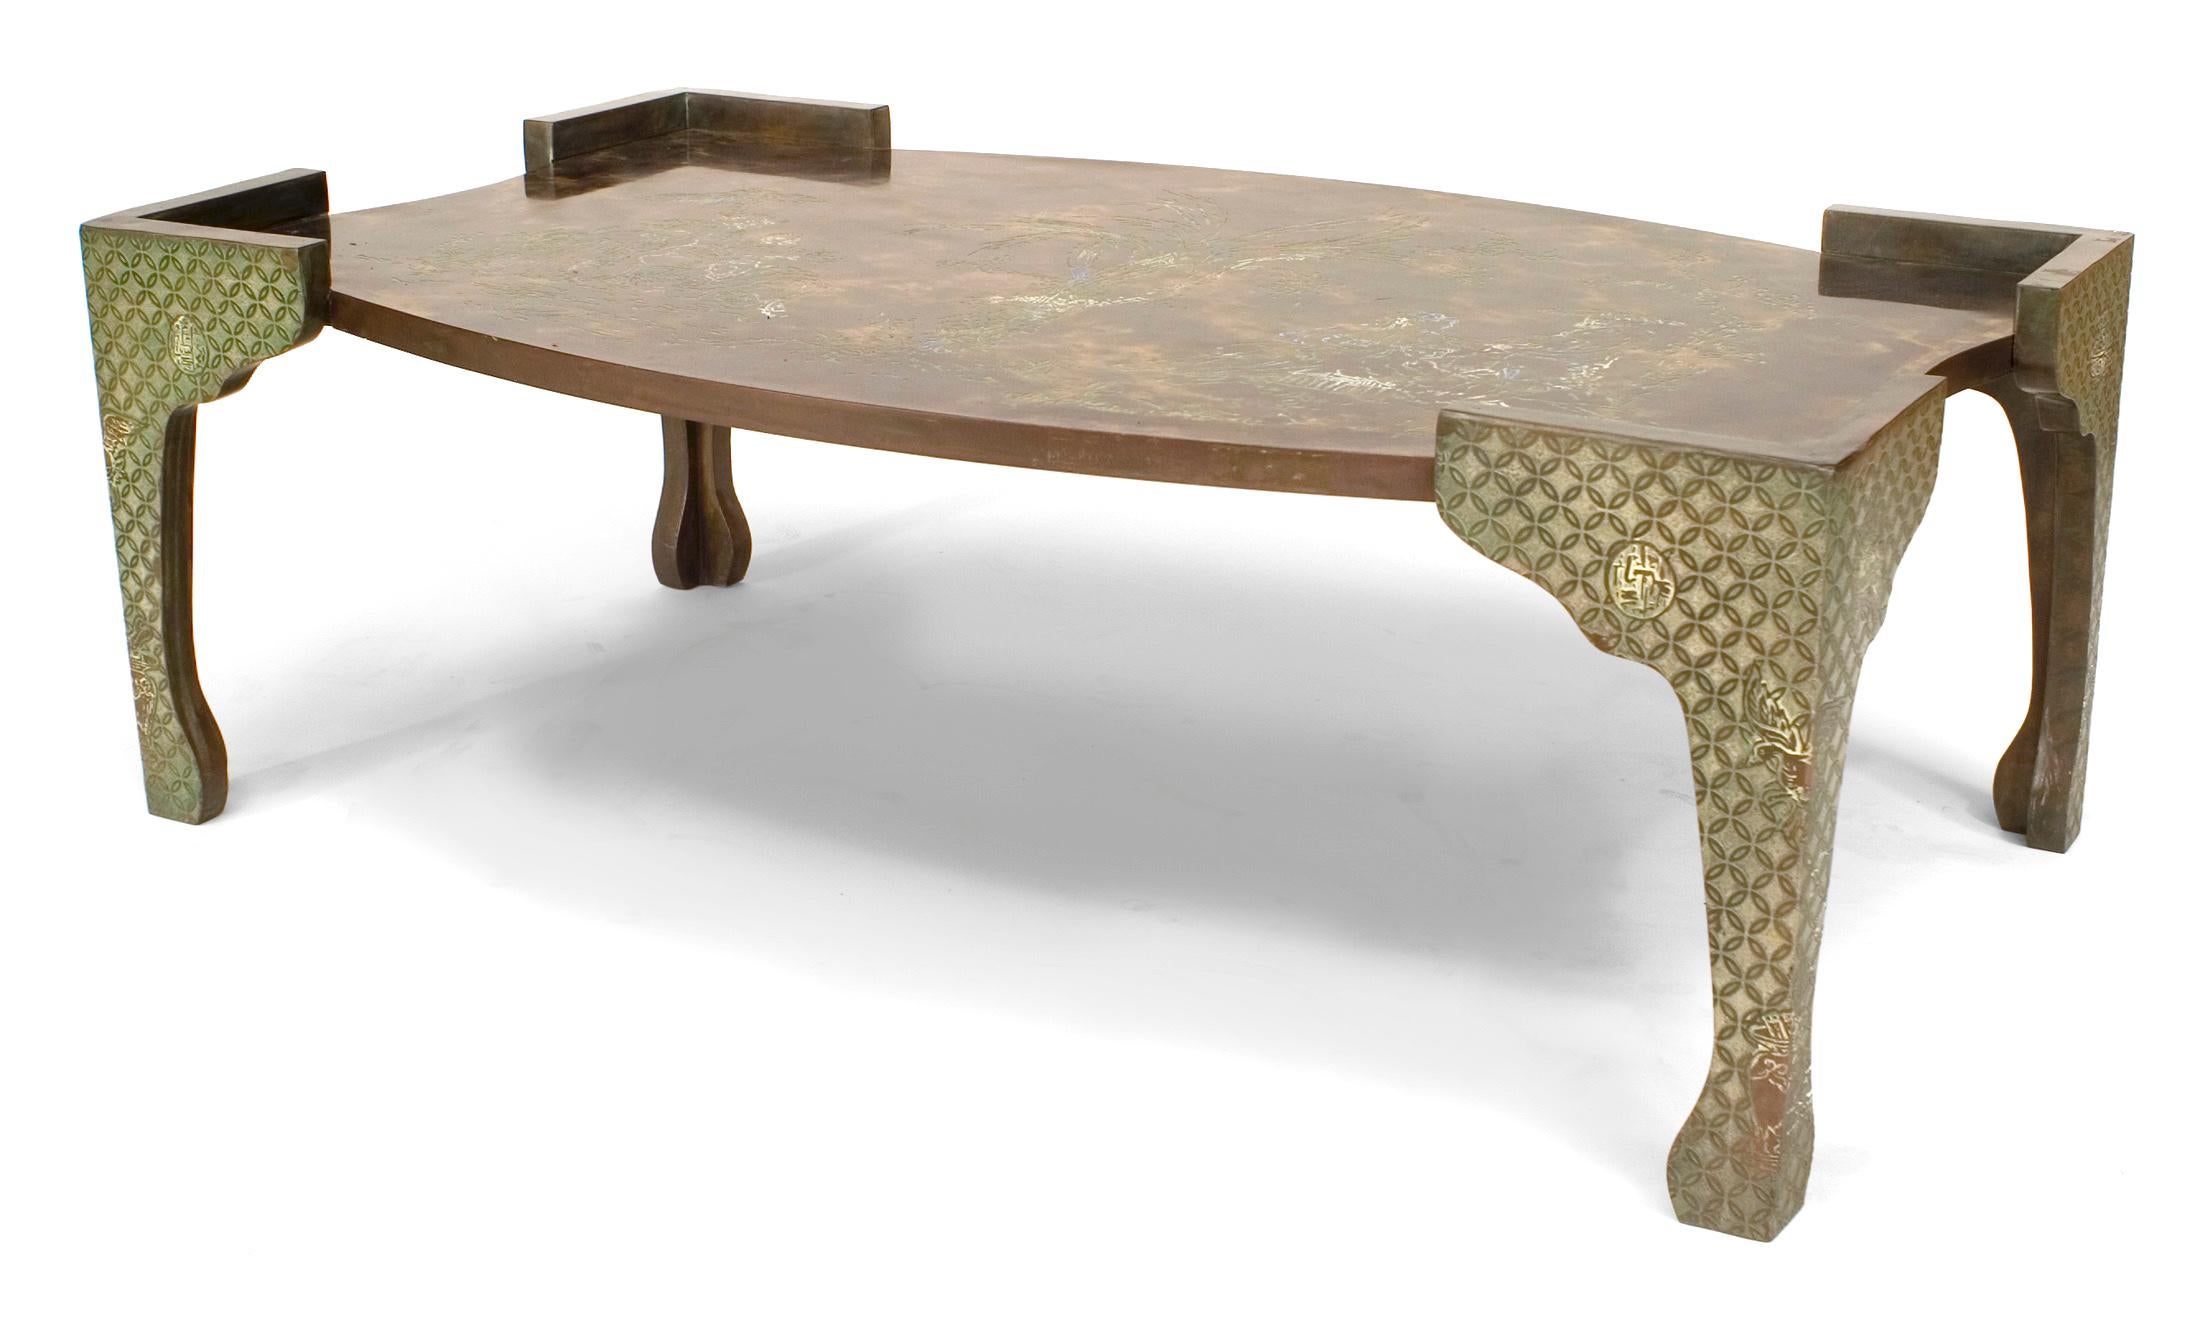 Post-Modern Chinoiserie-Style Coffee Table, by Philip and Kelvin LaVerne